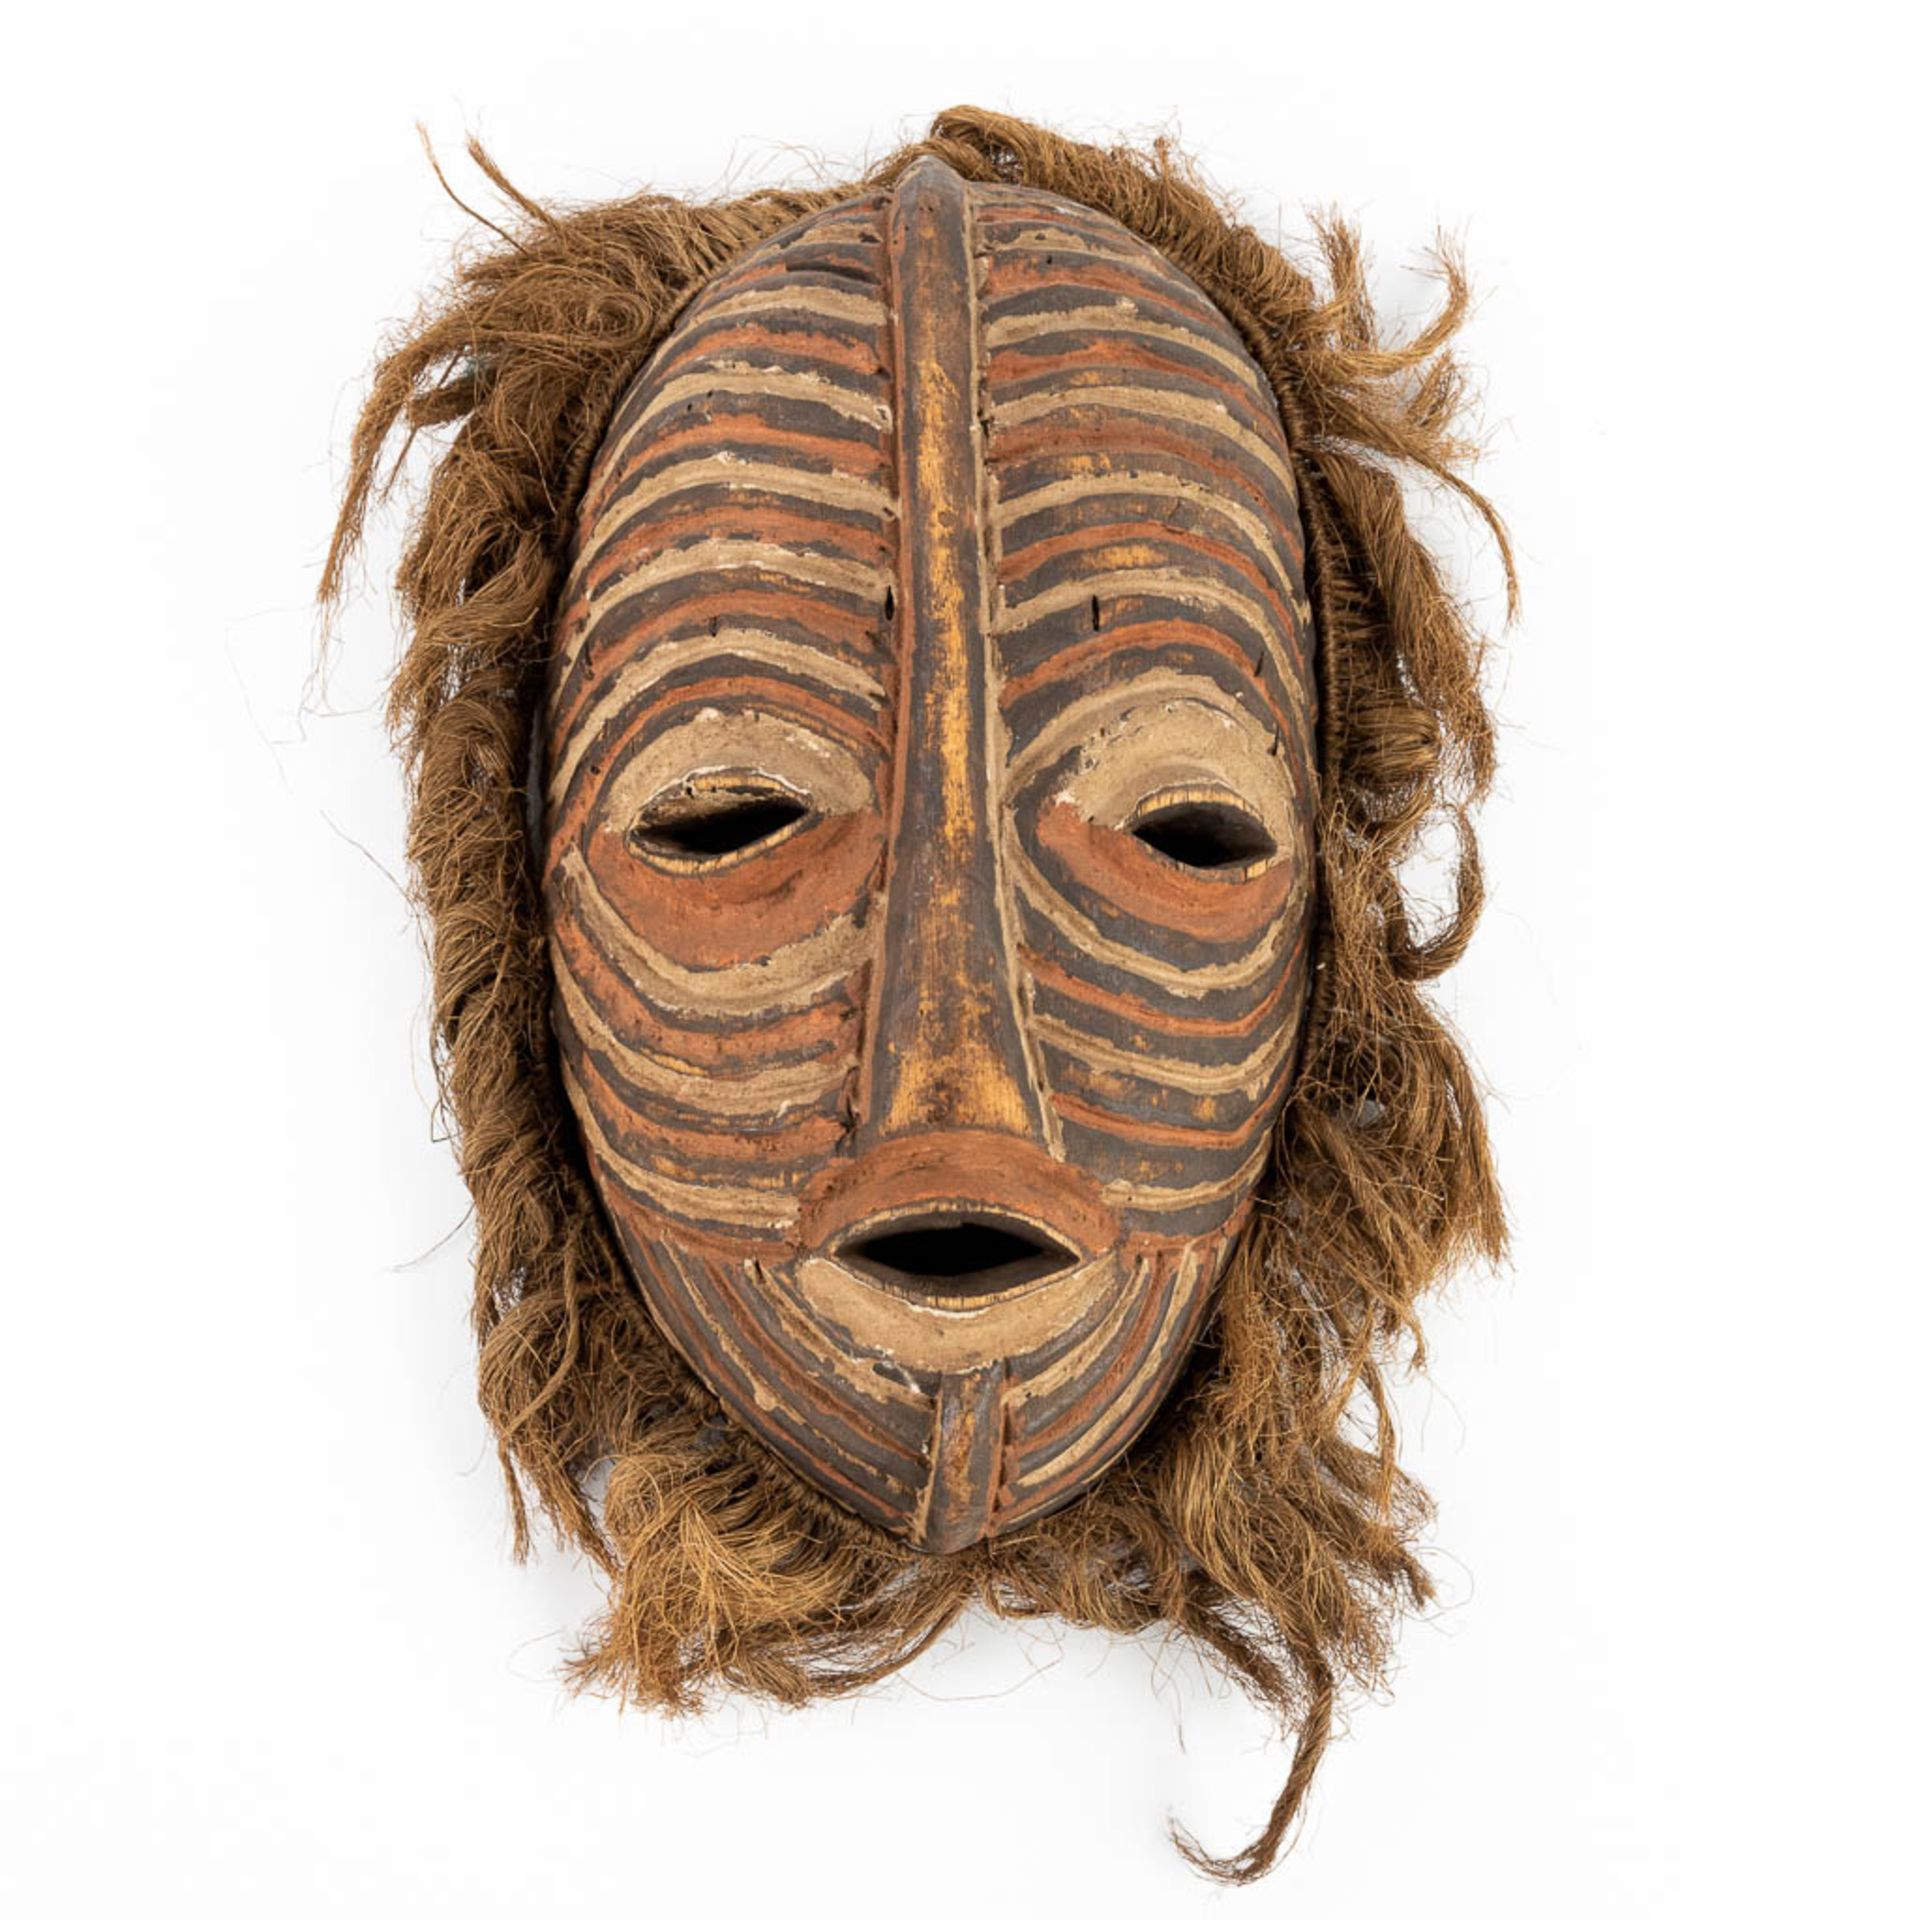 A collection of 2 African masks 'Chokwe' and 'Luba Songye'. (L: 13 x W: 24 x H: 43 cm) - Image 3 of 21